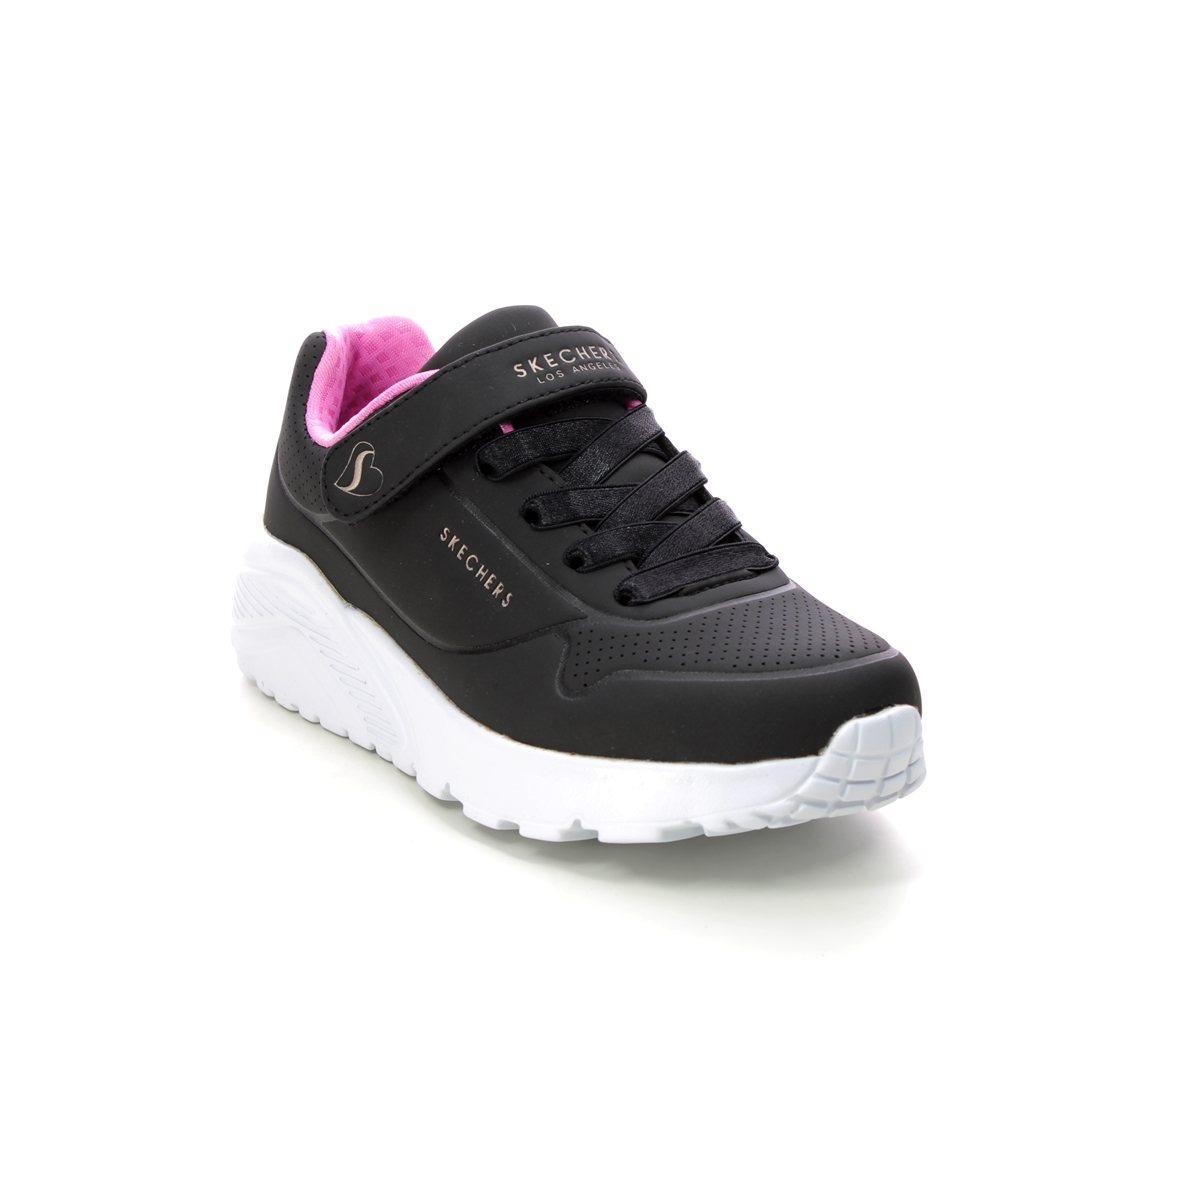 Skechers Uno Lite Bungee BKRG Black Rose Gold Kids girls trainers 310451L in a Plain Man-made in Size 33